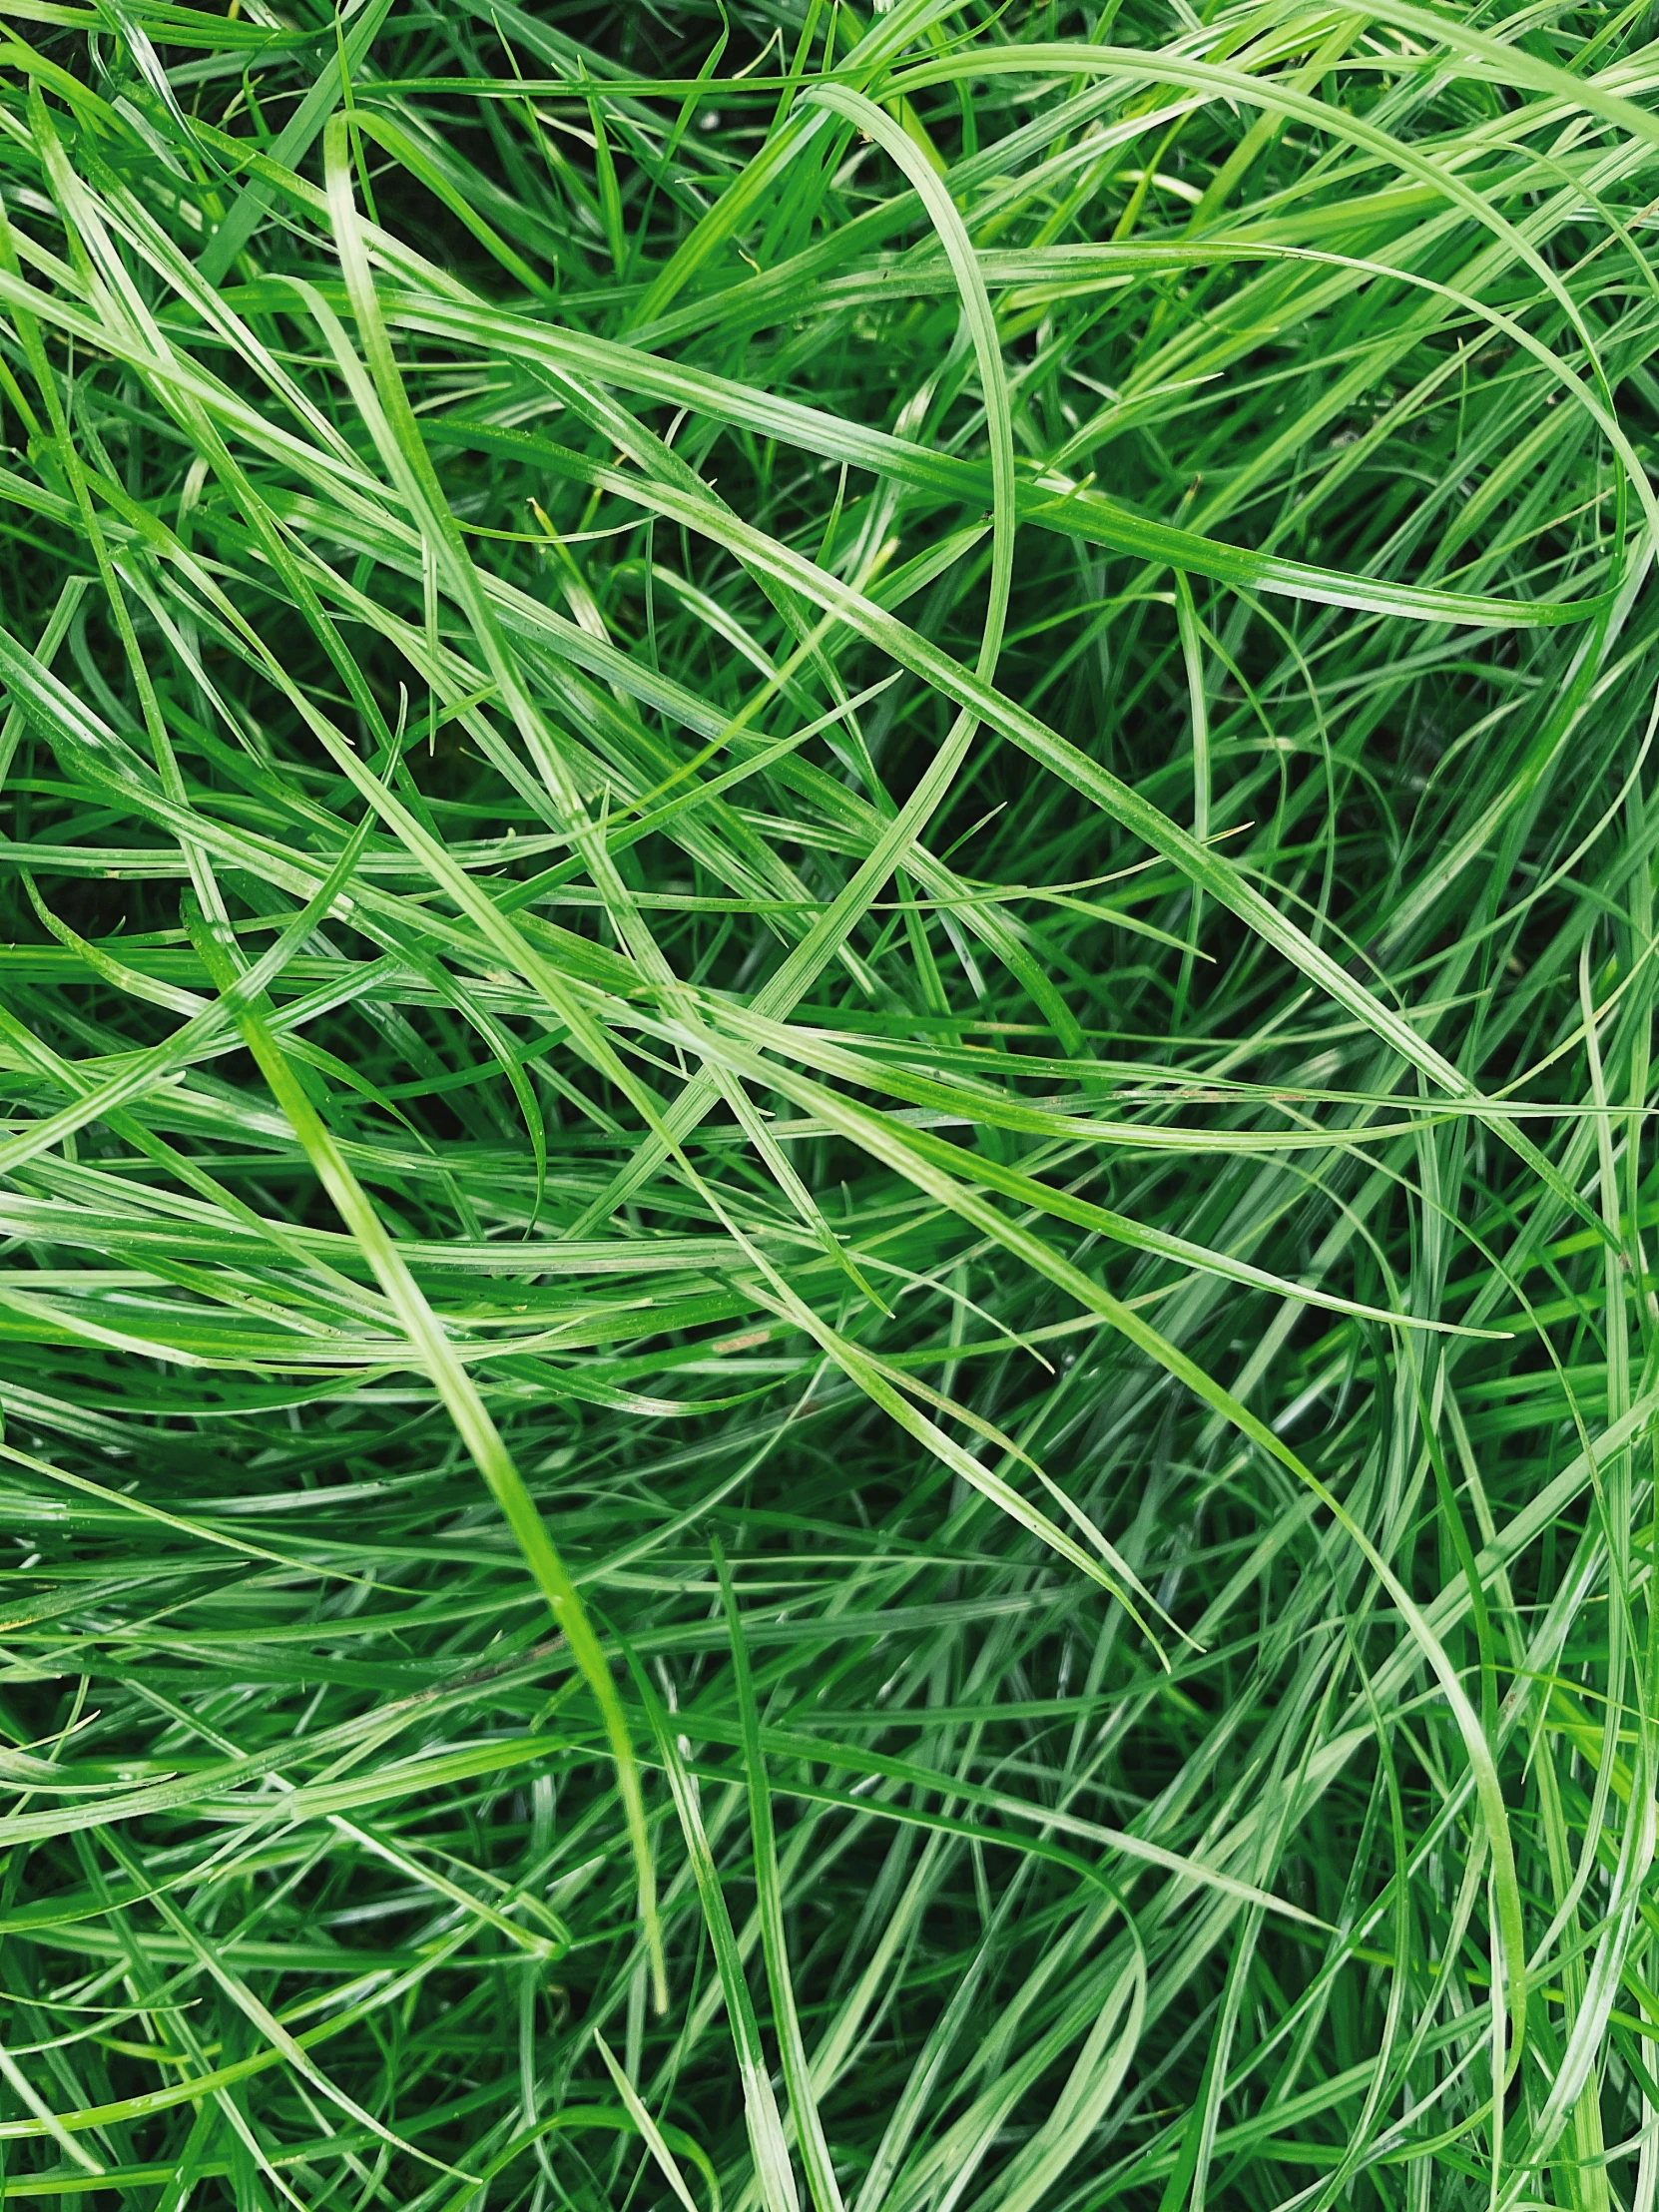 grass close up with lots of green plants